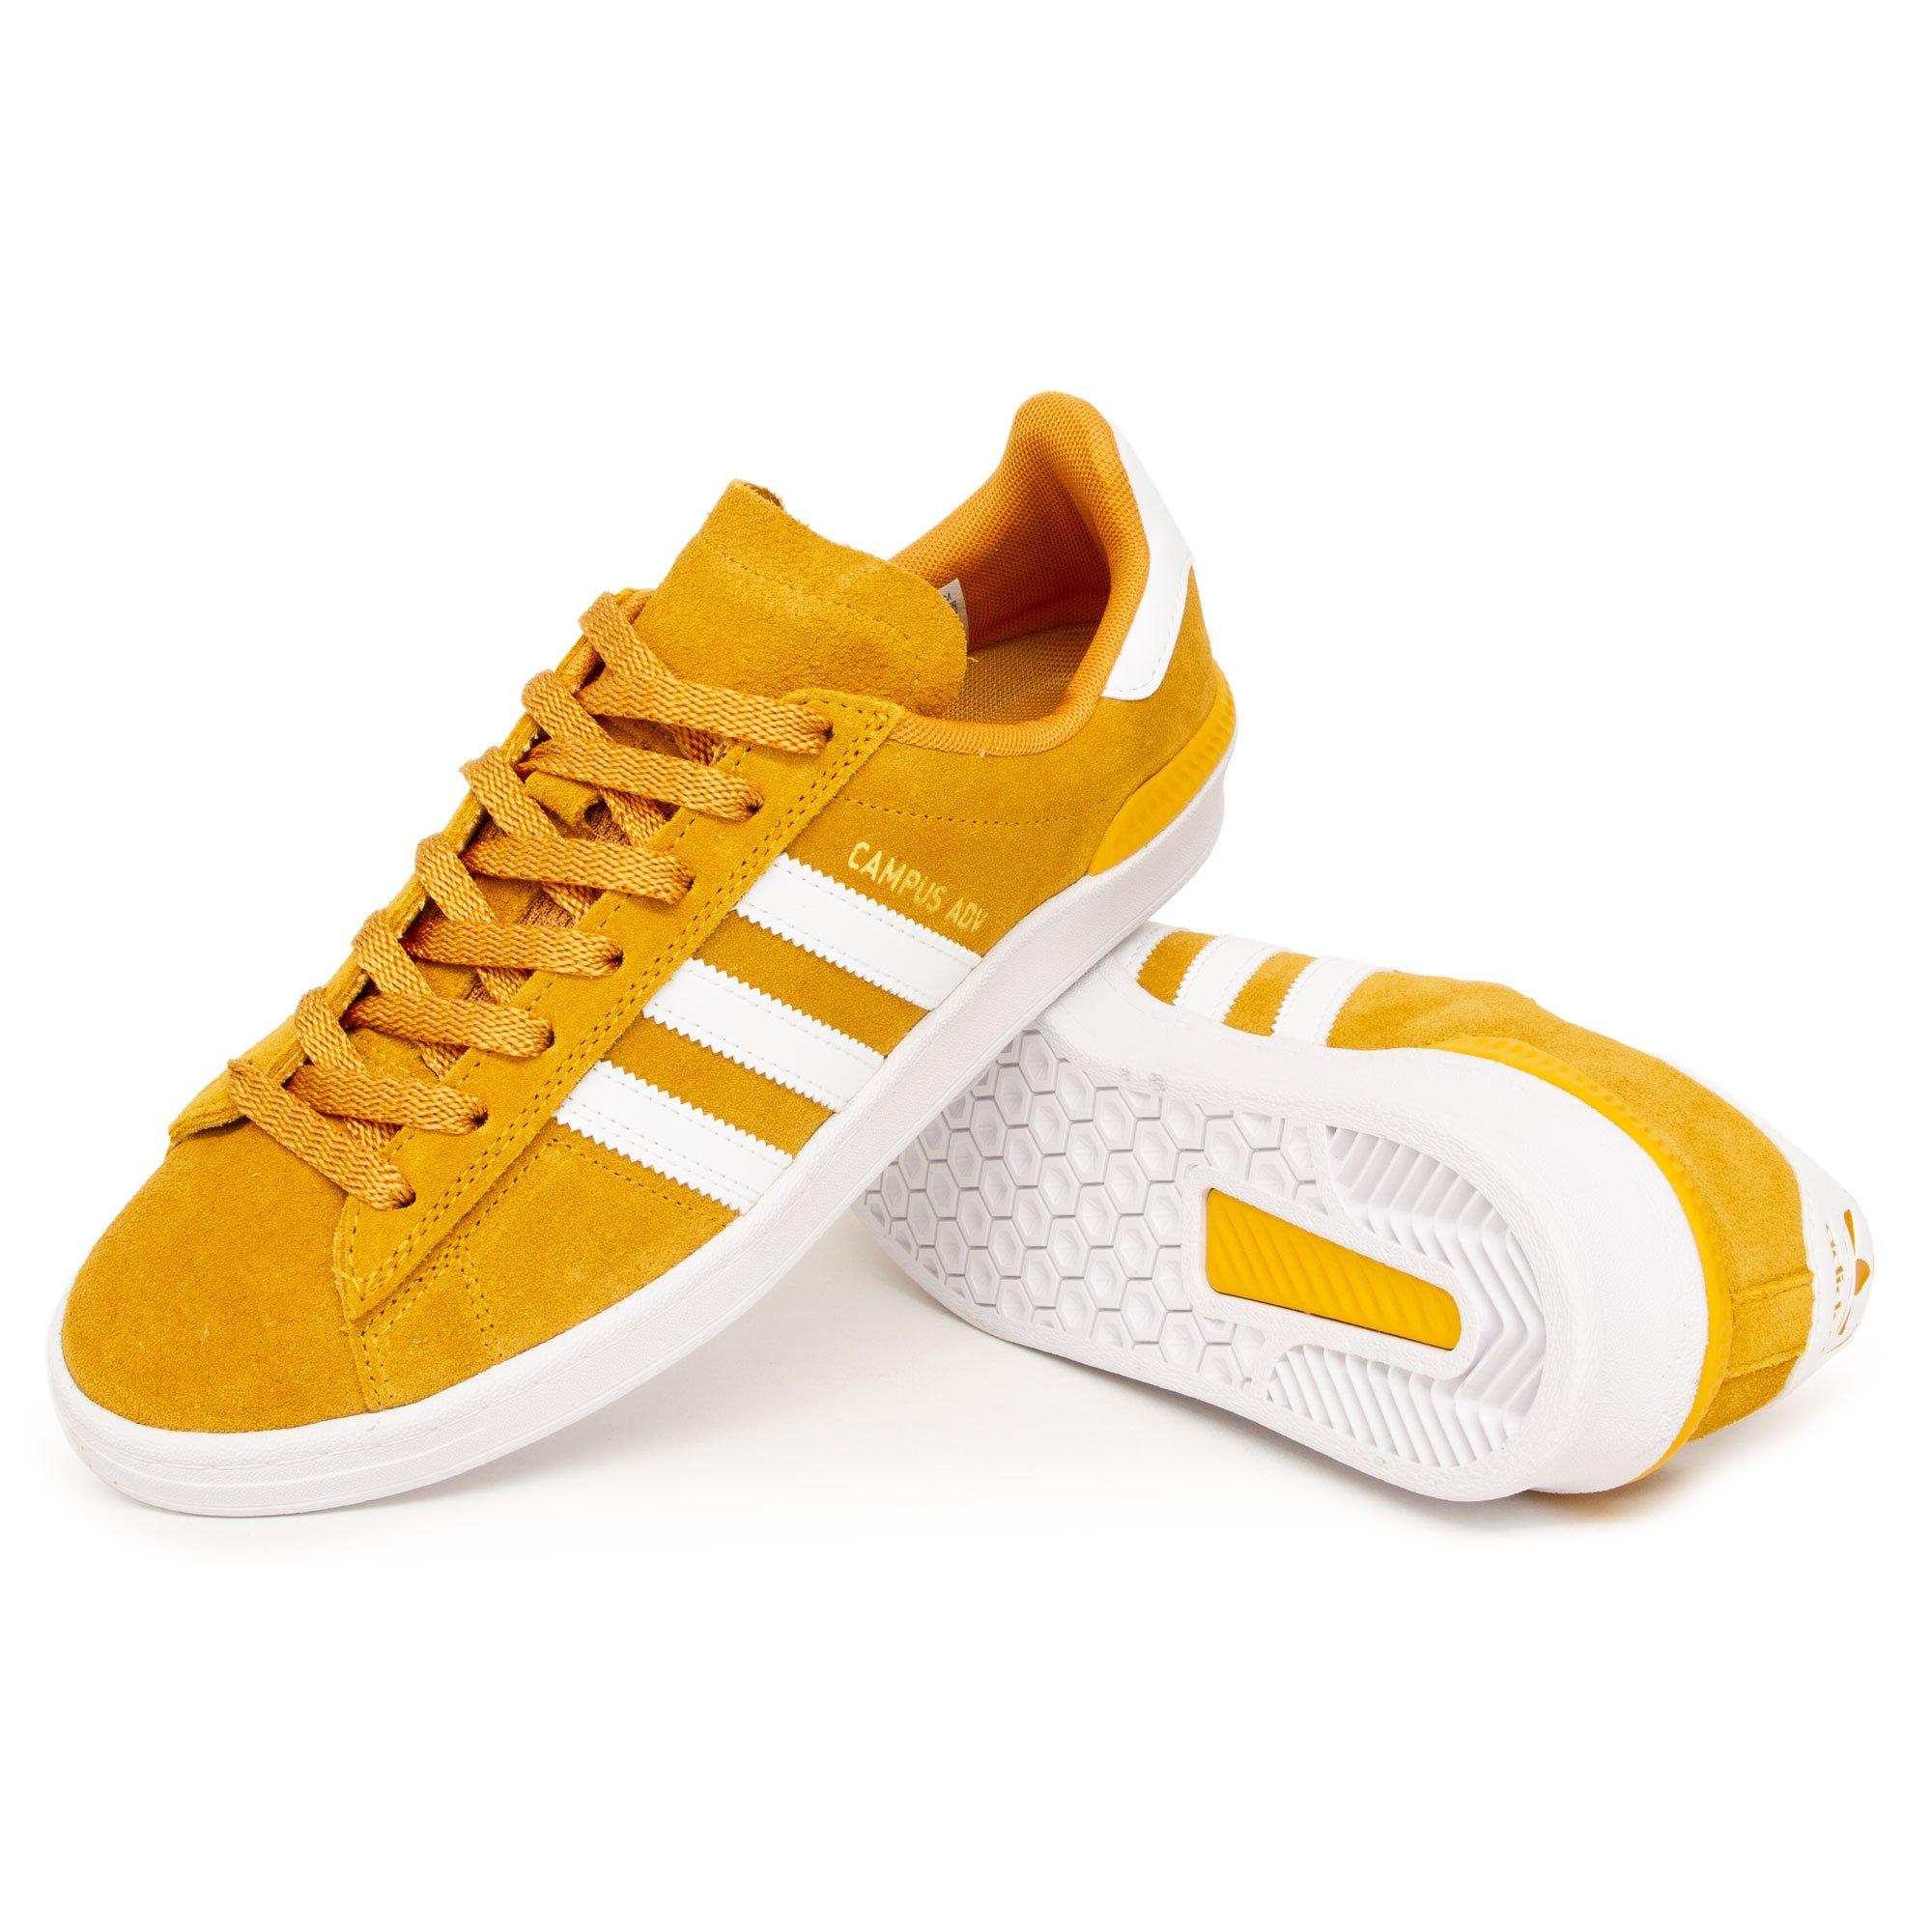 adidas Leather Campus 80s Trainers in 